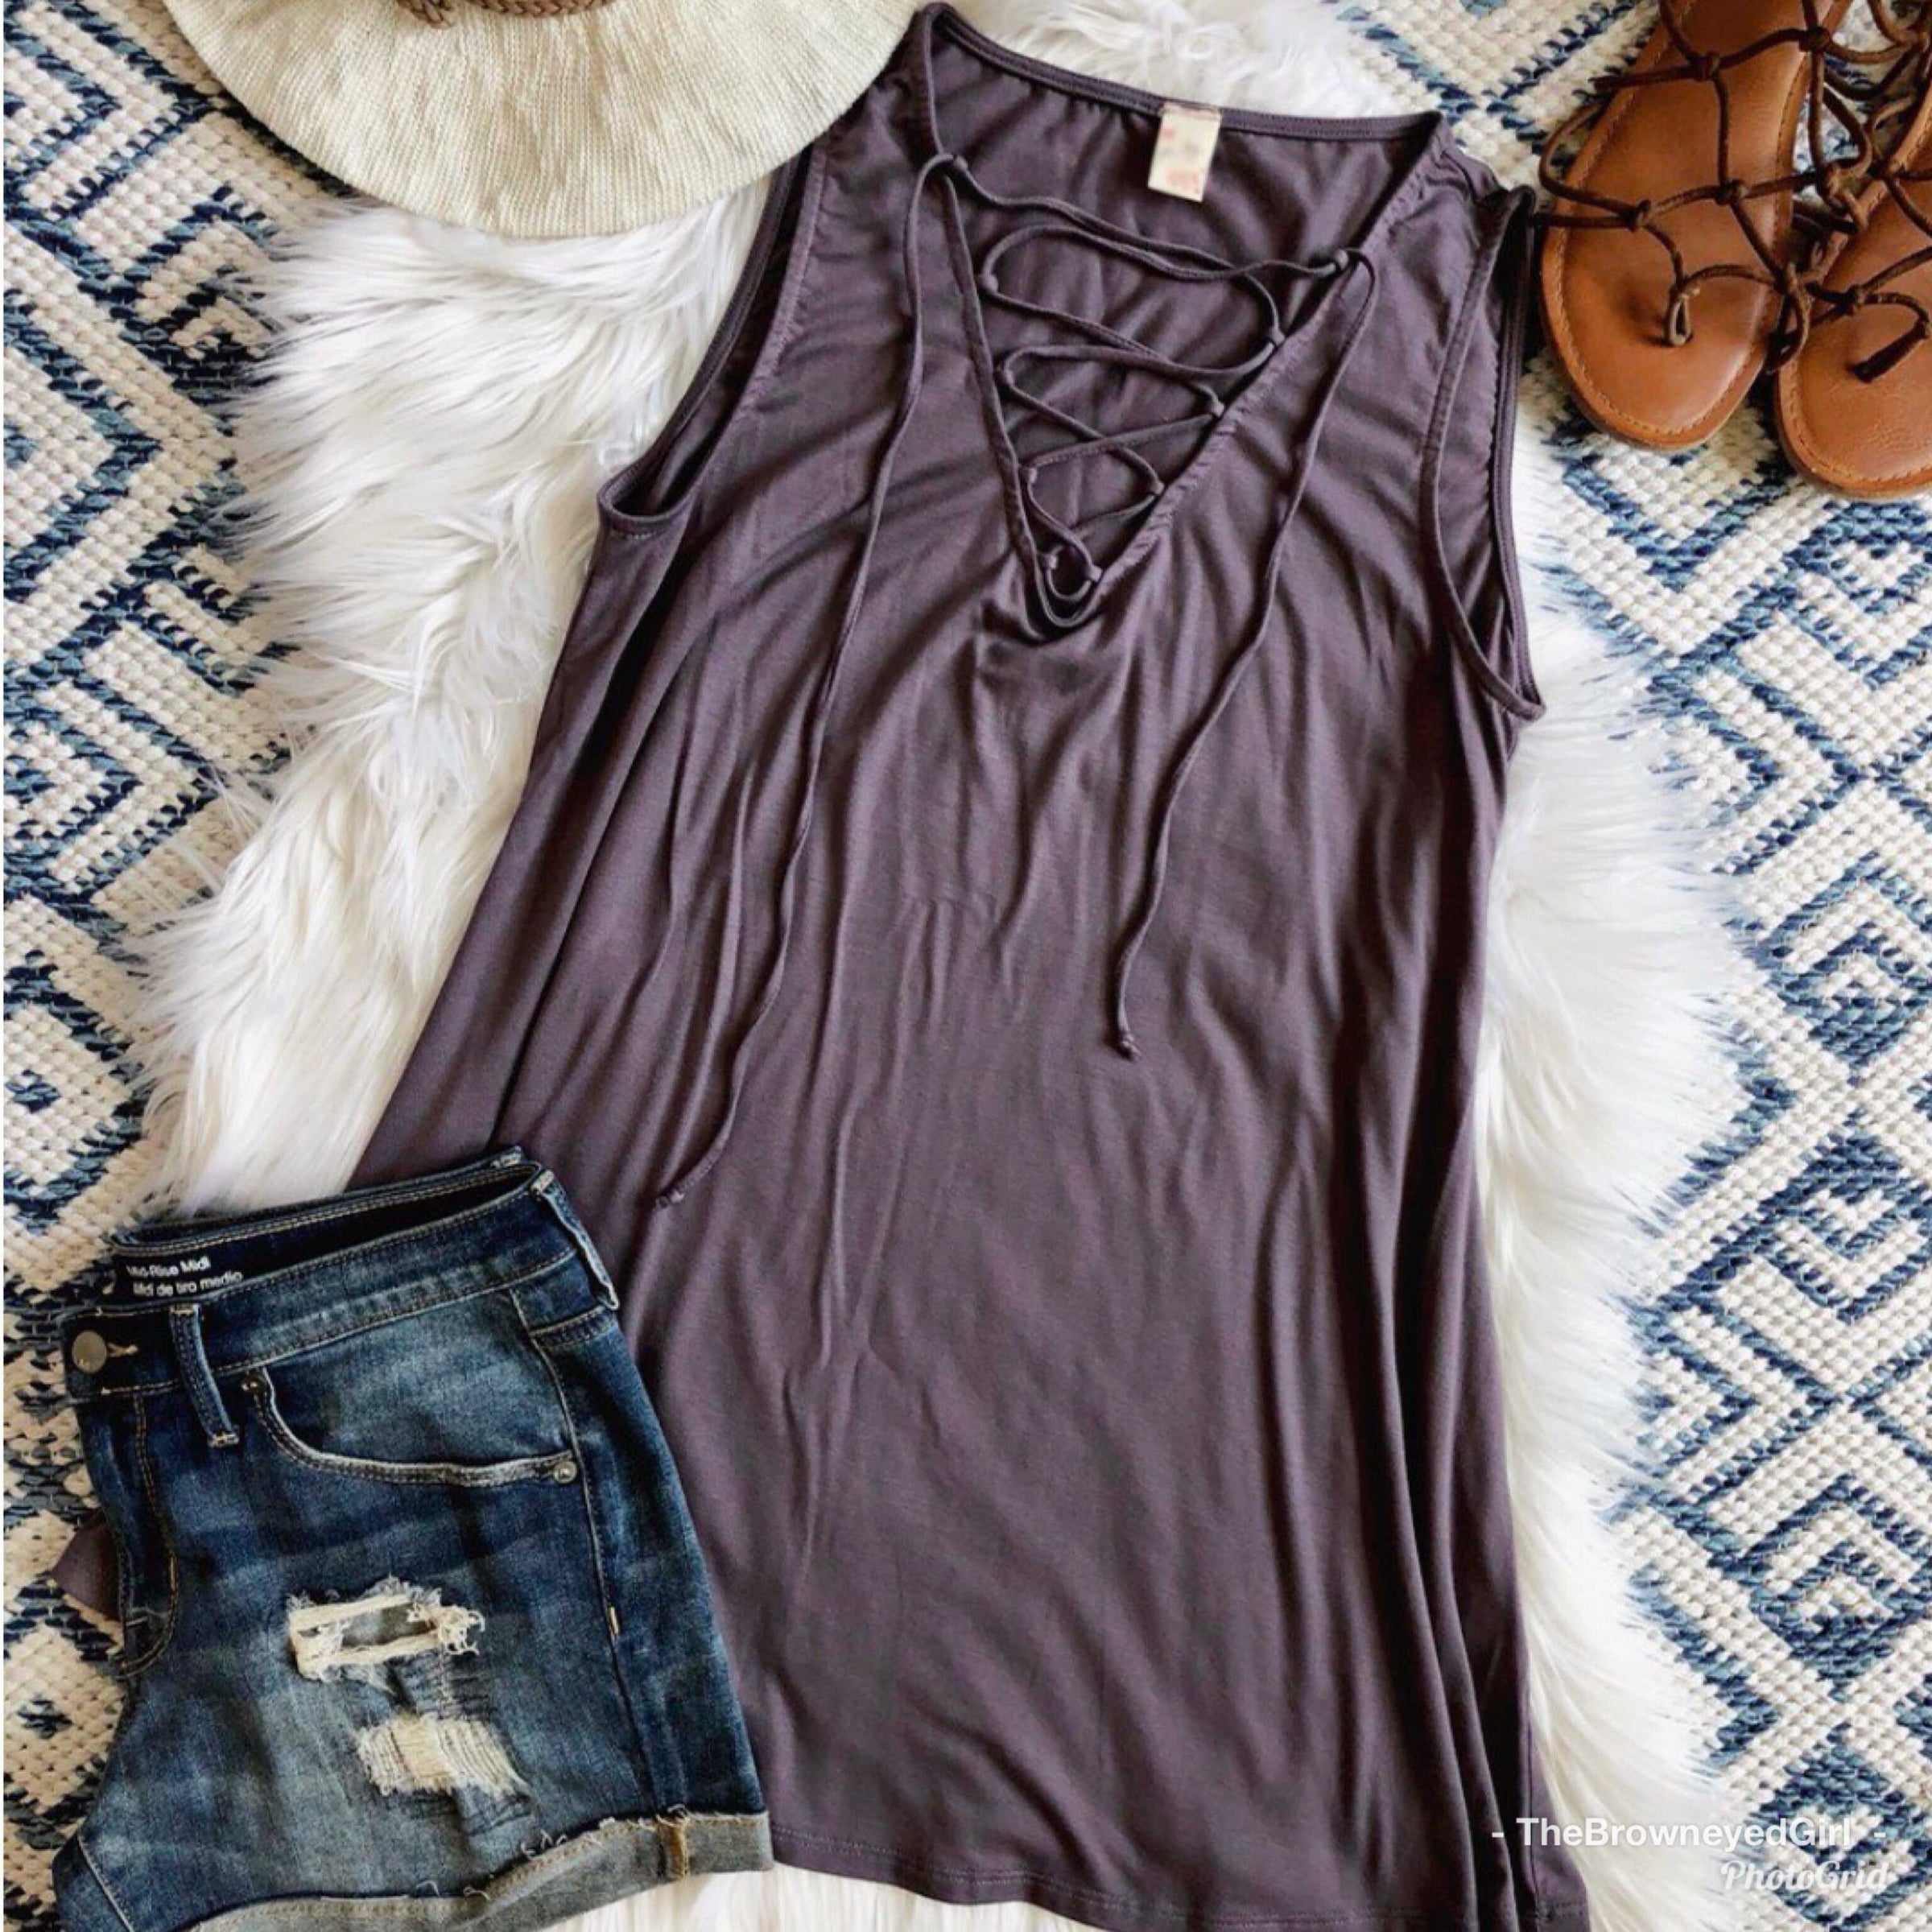 It's About Comfort Solid Lace Up Tank Top - TheBrownEyedGirl Boutique